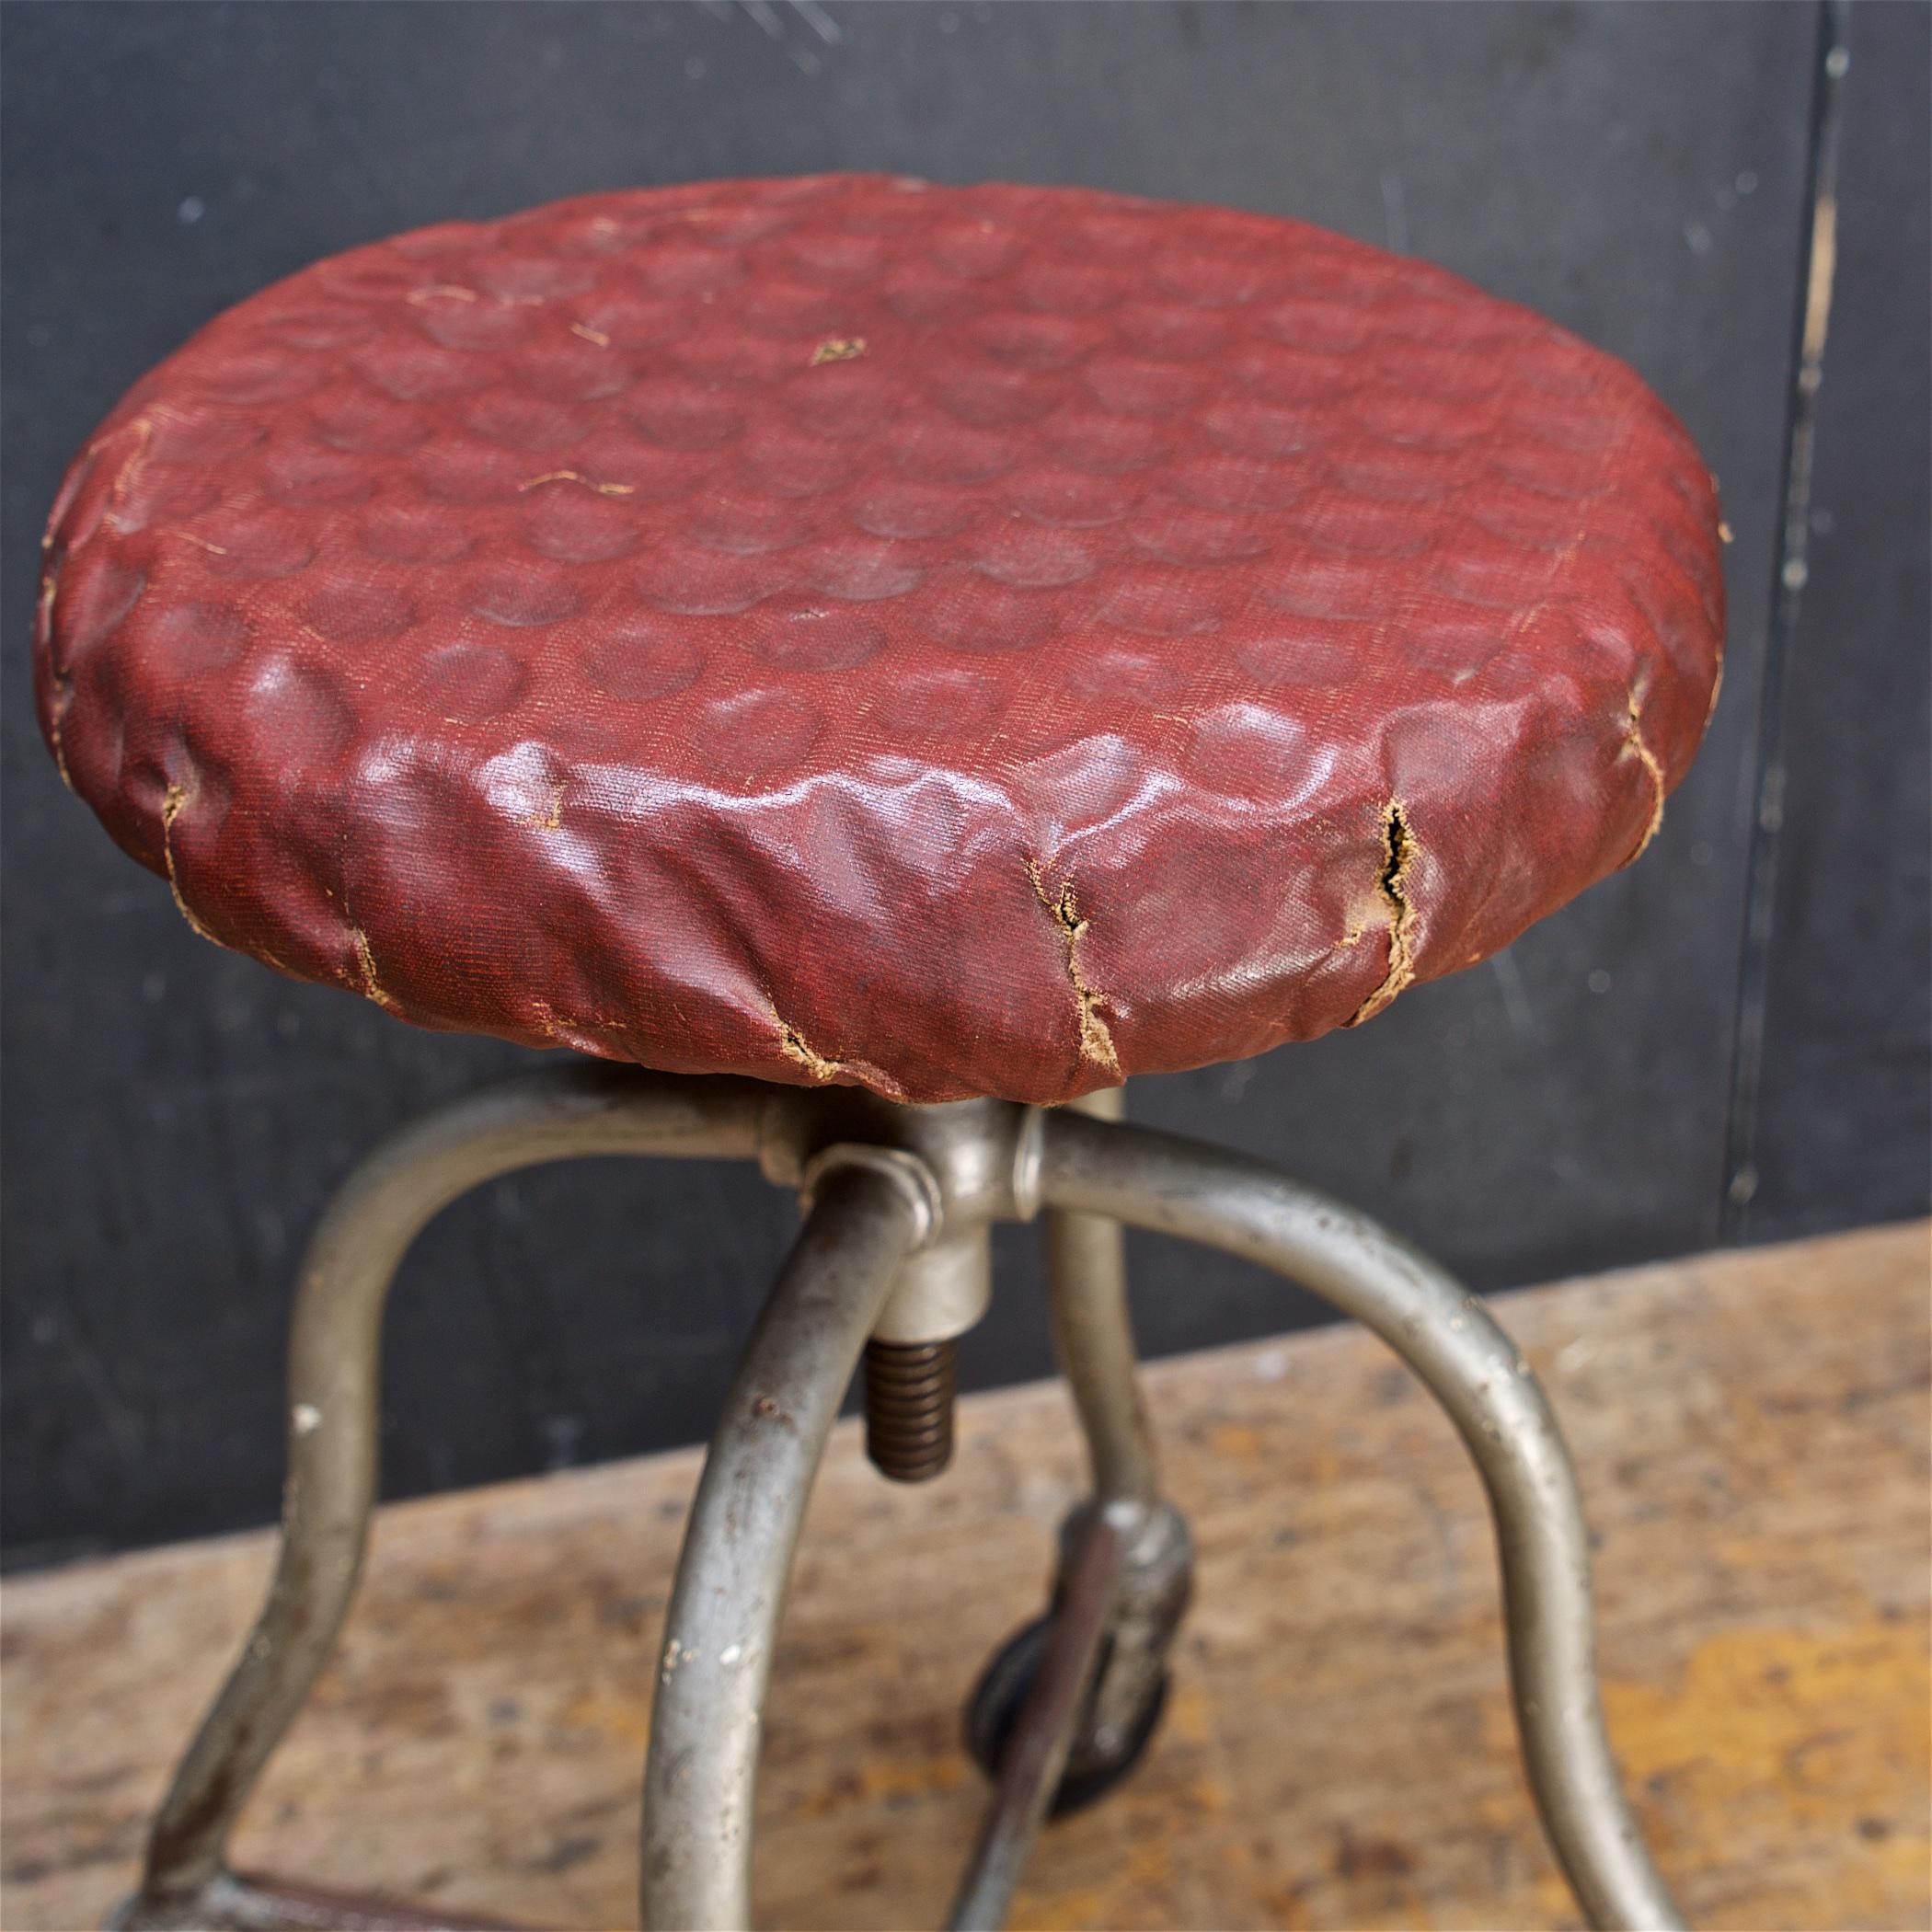 Enameled 1930s Dimpled Industrial Artists Painters Sculptors Stool Vintage Iron Wheels For Sale